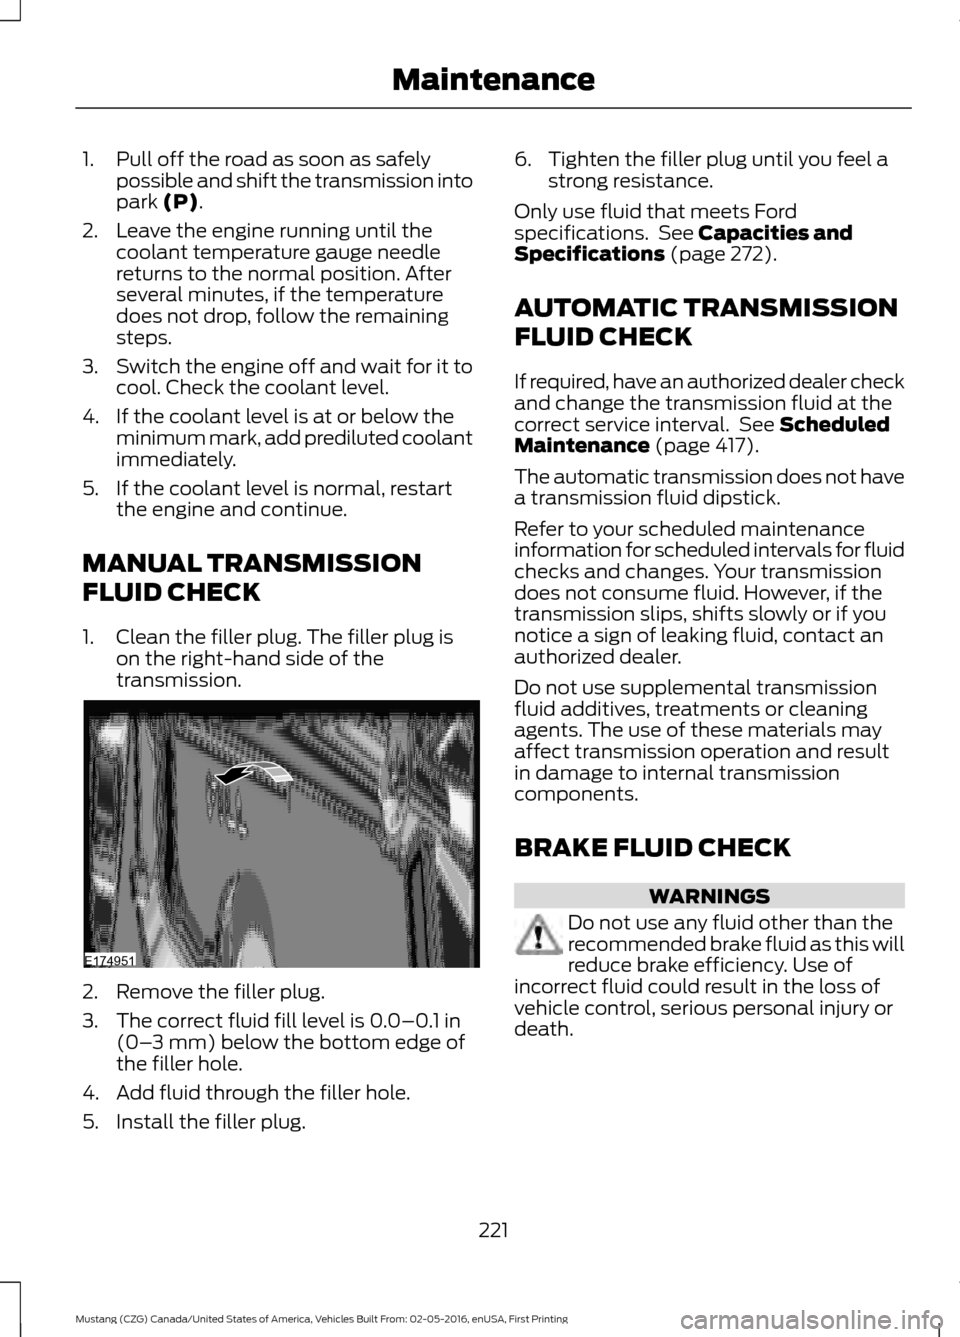 FORD MUSTANG 2017 6.G Owners Manual 1. Pull off the road as soon as safely
possible and shift the transmission into
park (P).
2. Leave the engine running until the coolant temperature gauge needle
returns to the normal position. After
s